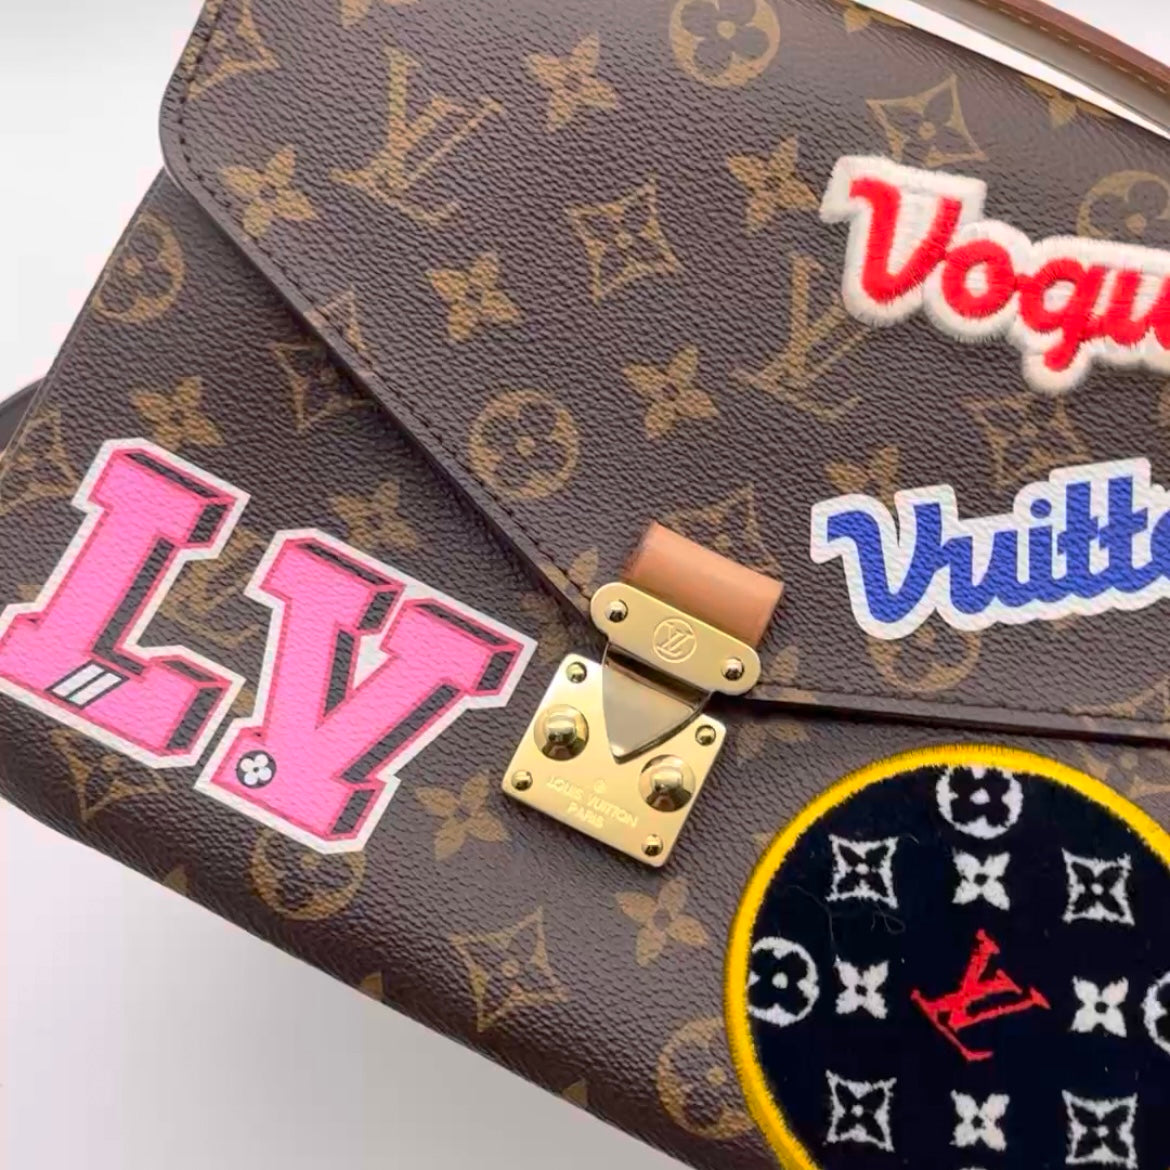 lv bag with patches